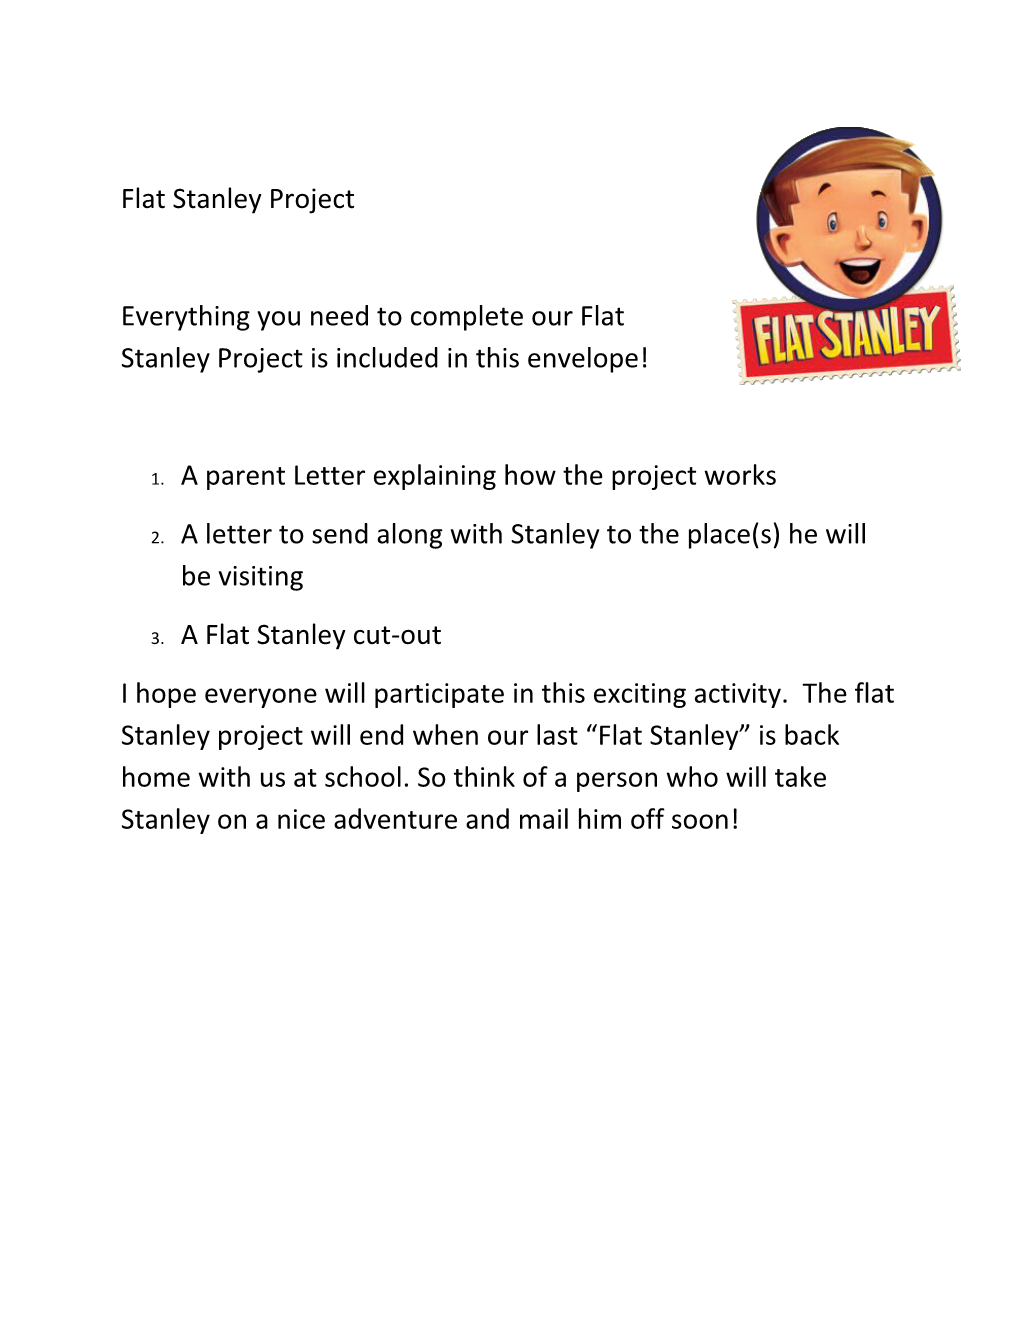 Everything You Need to Complete Our Flat Stanley Project Is Included in This Envelope!